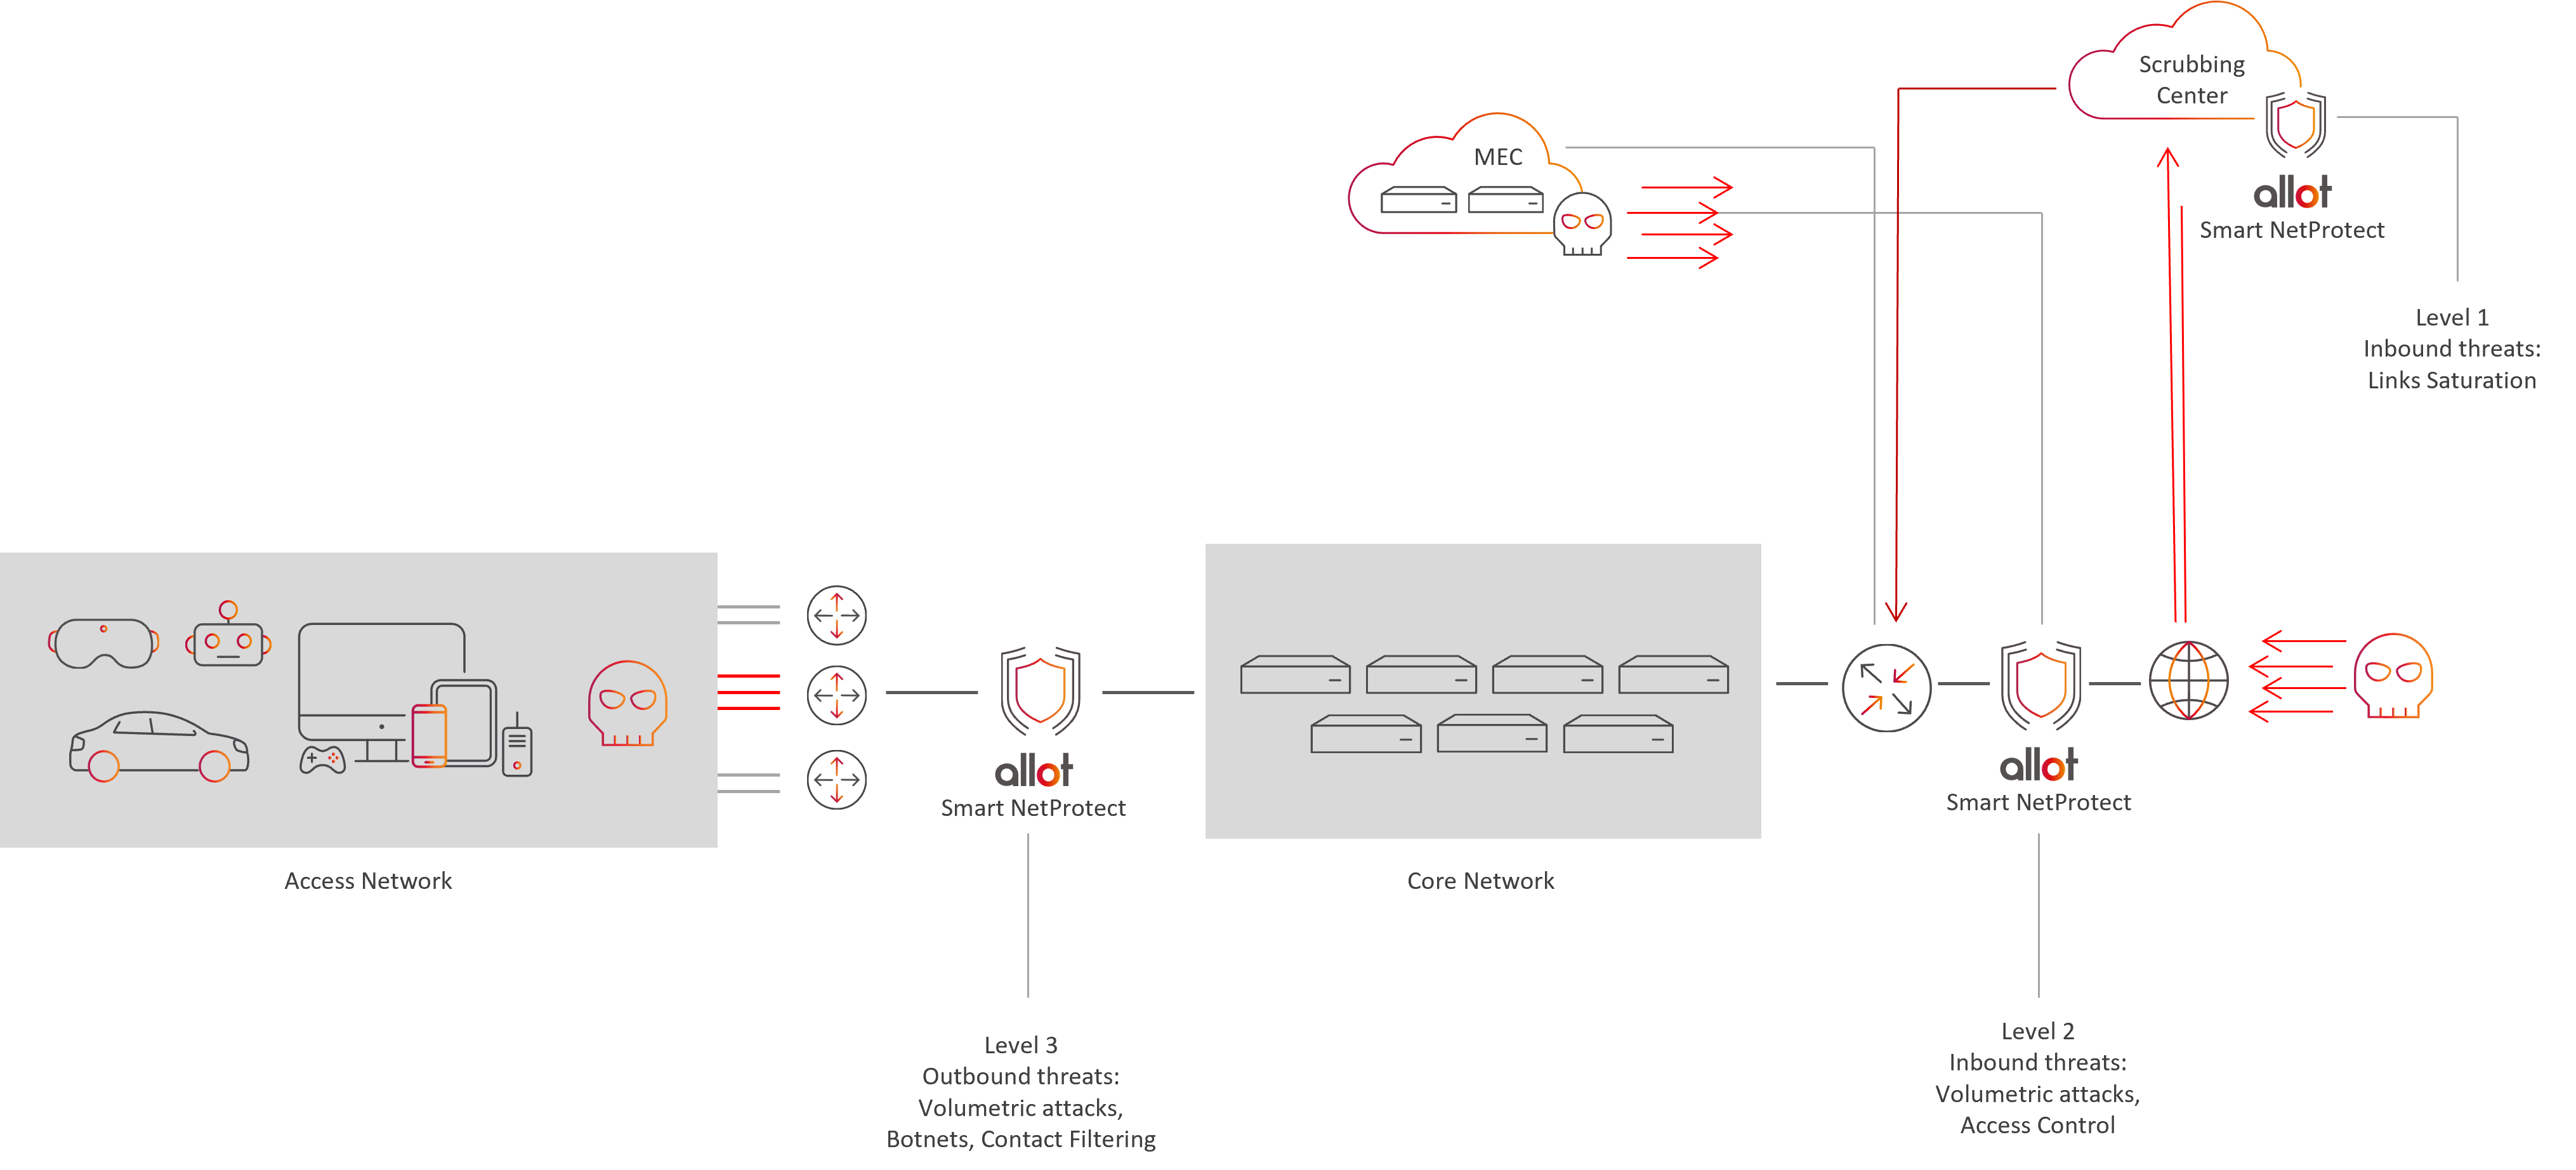 Telecom Network Potential Attack Entry Points and Allot Smart NetProtect Solution